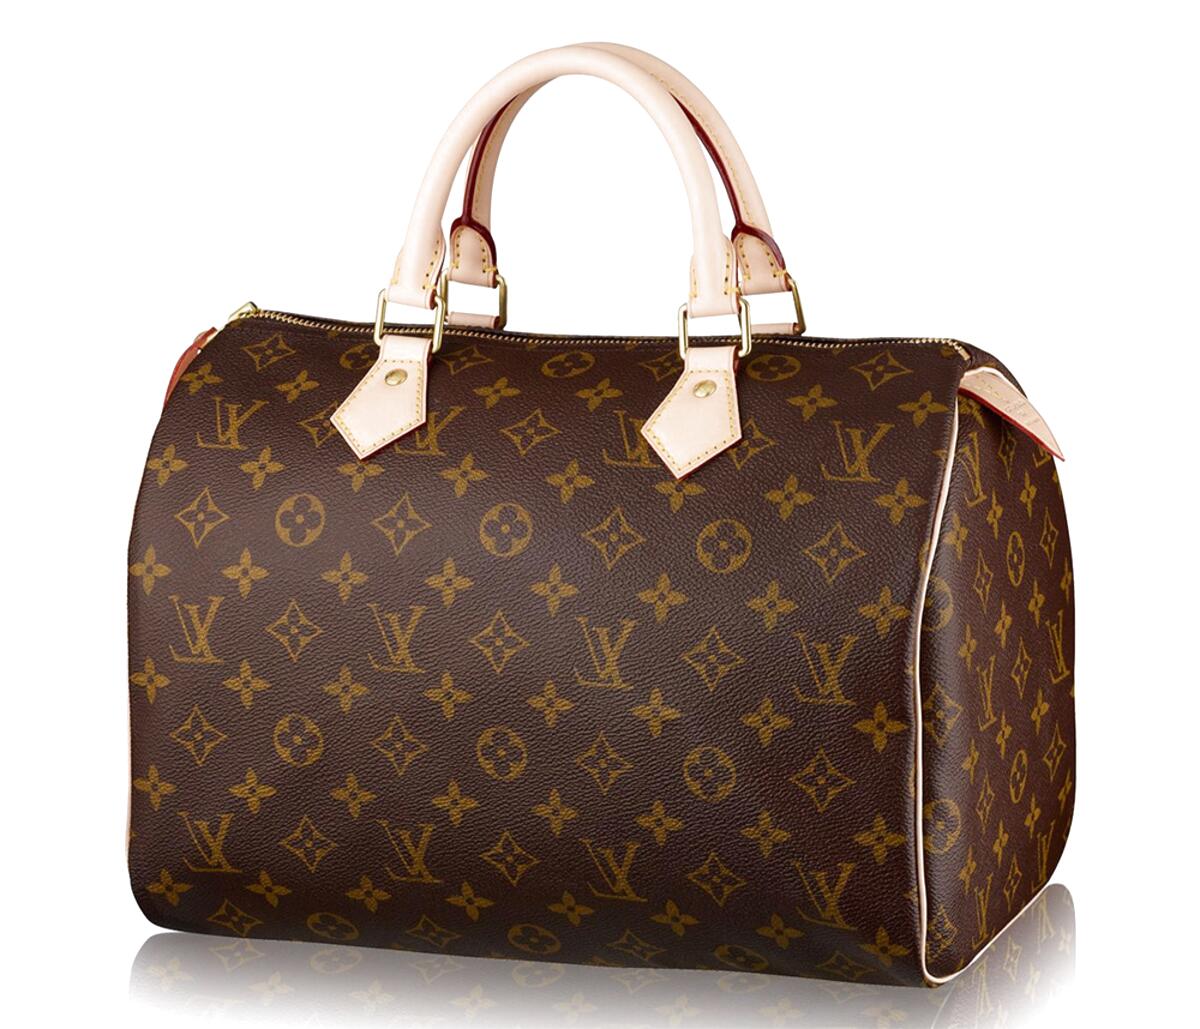 Louis Vuitton Bag for sale in UK | View 103 bargains